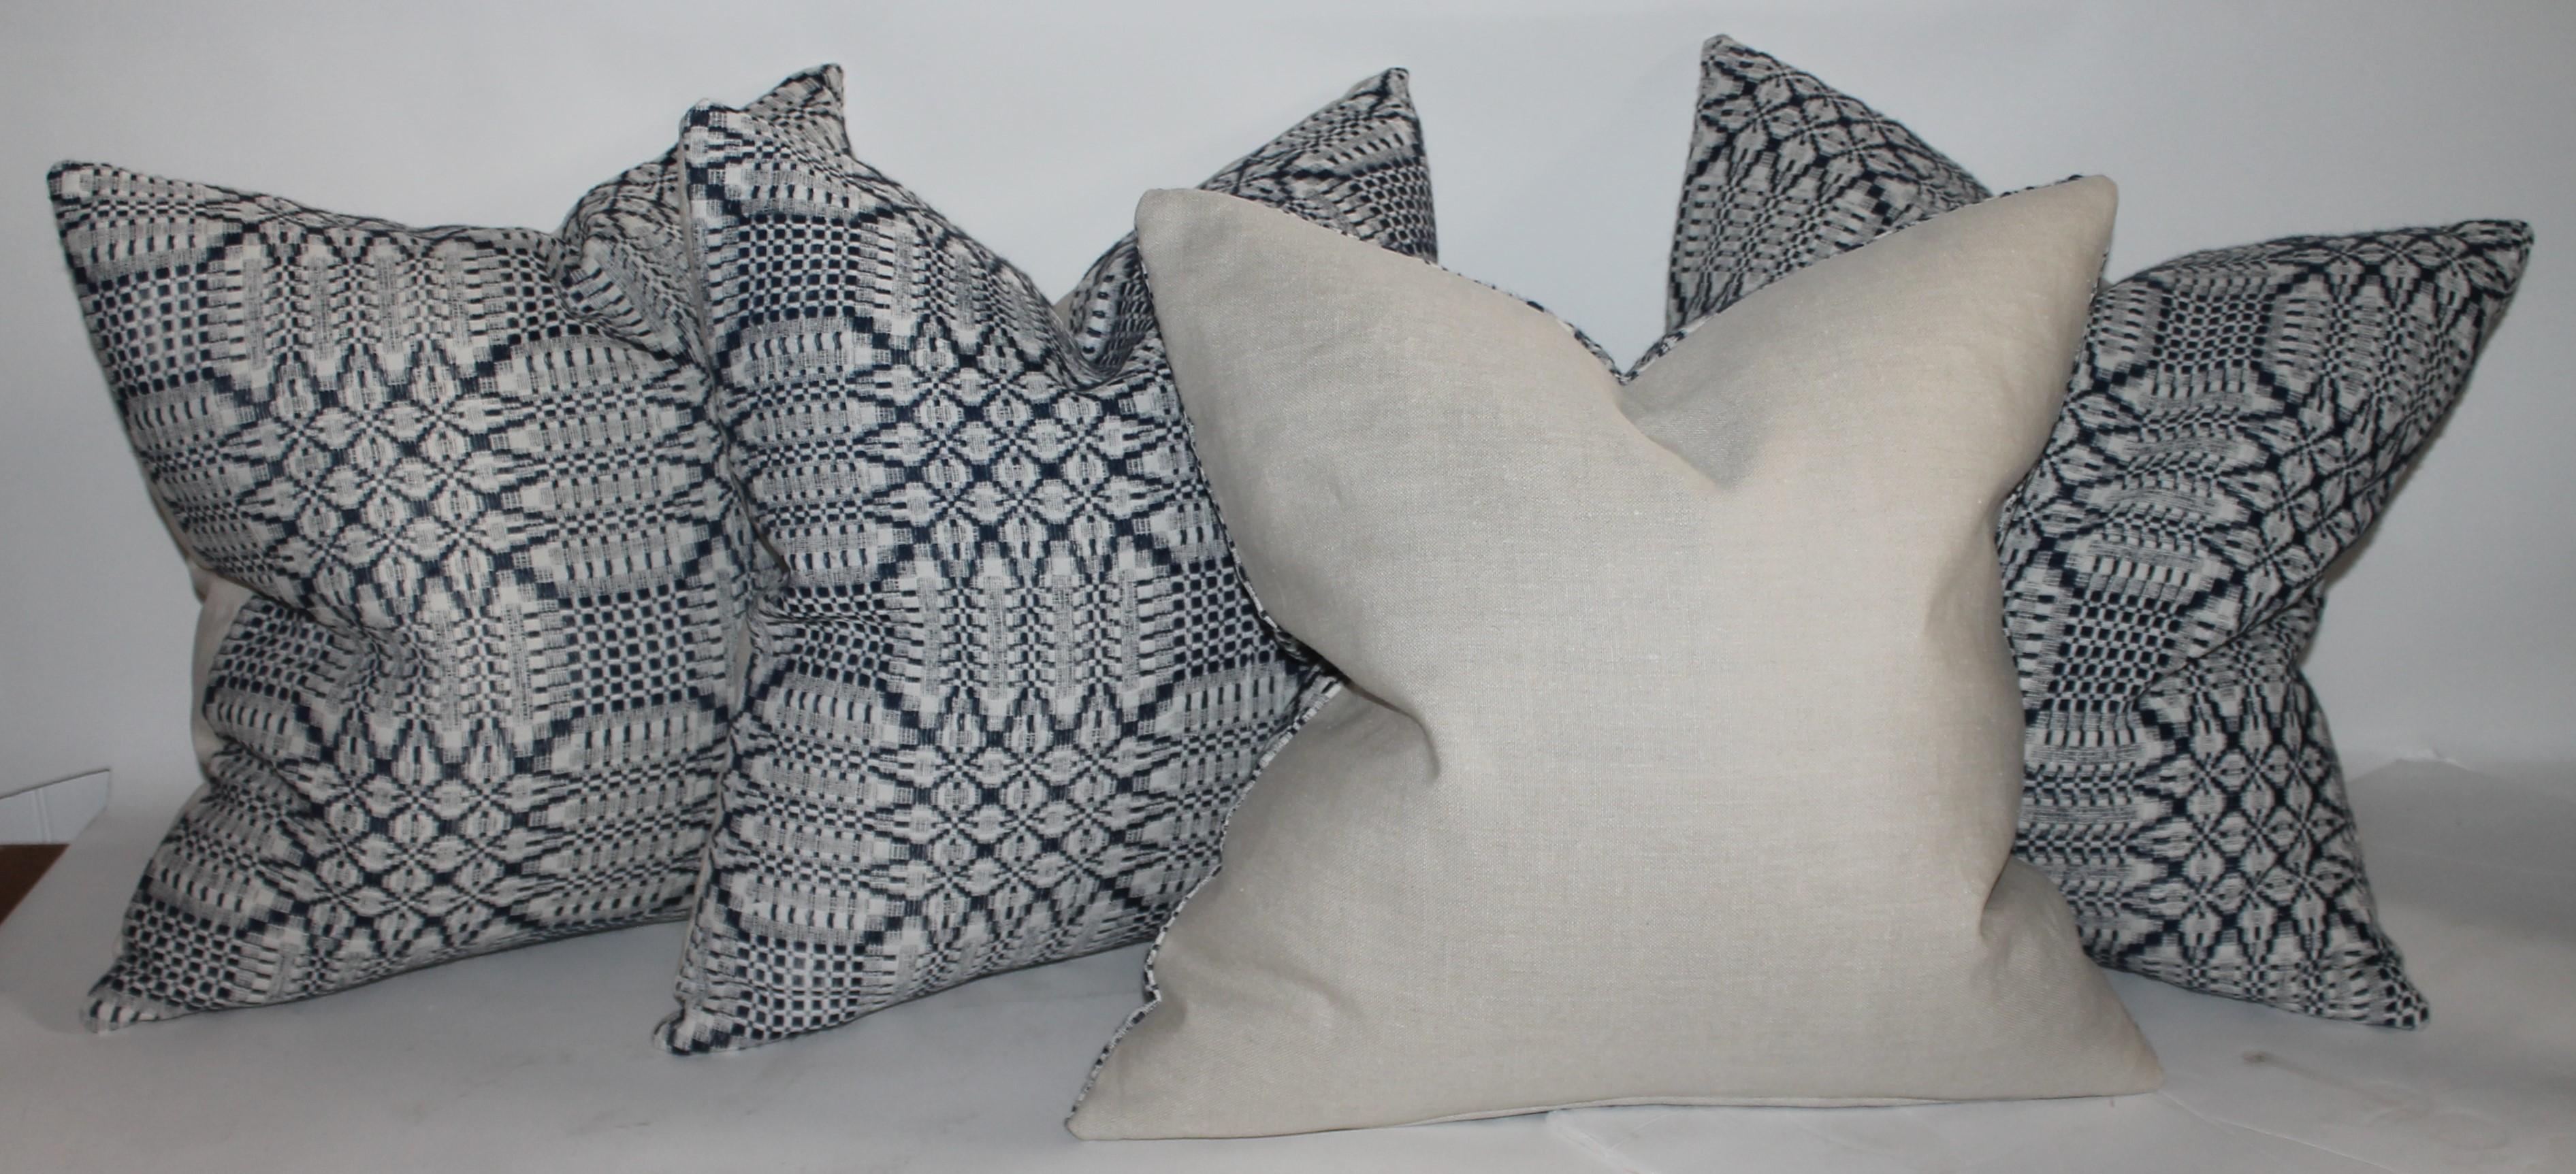 These fine hand woven robin egg blue coverlet pillows are in pristine condition white linen fabric backings. The inserts are down & feather fill.